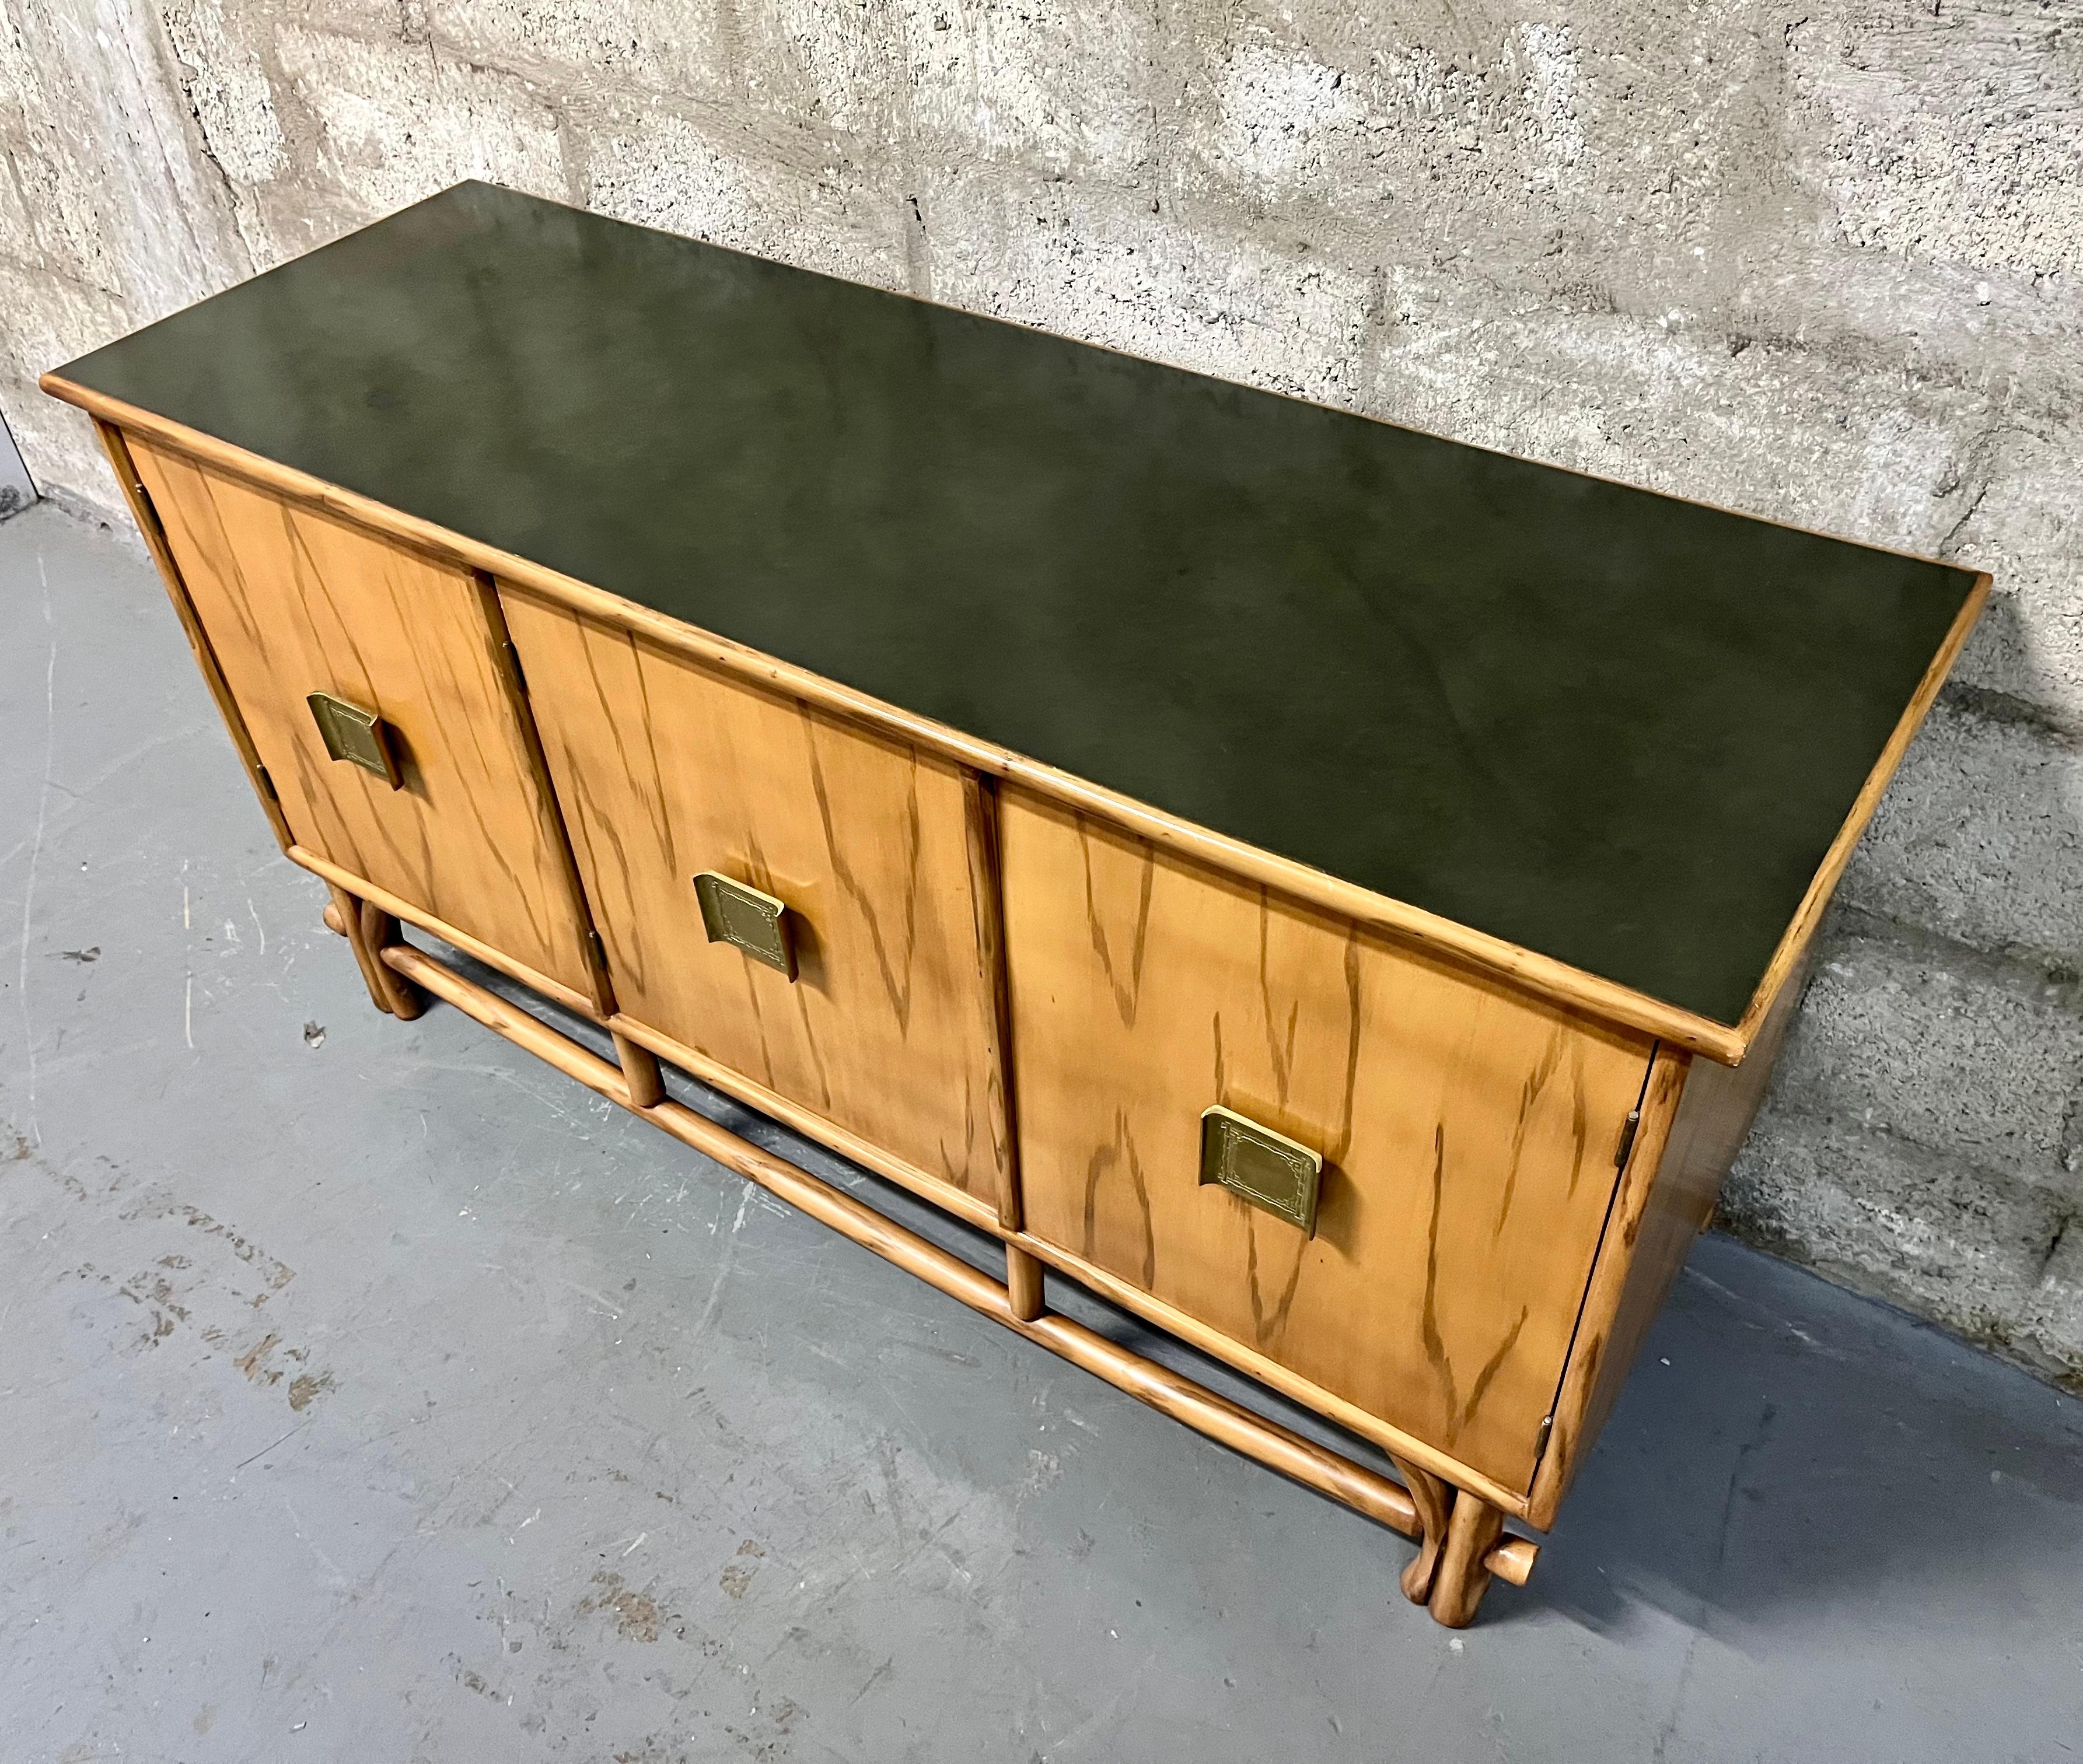 1960s Chinoiserie Inspired Sideboard in the Adrien Audoux & Frida Minet Style For Sale 1